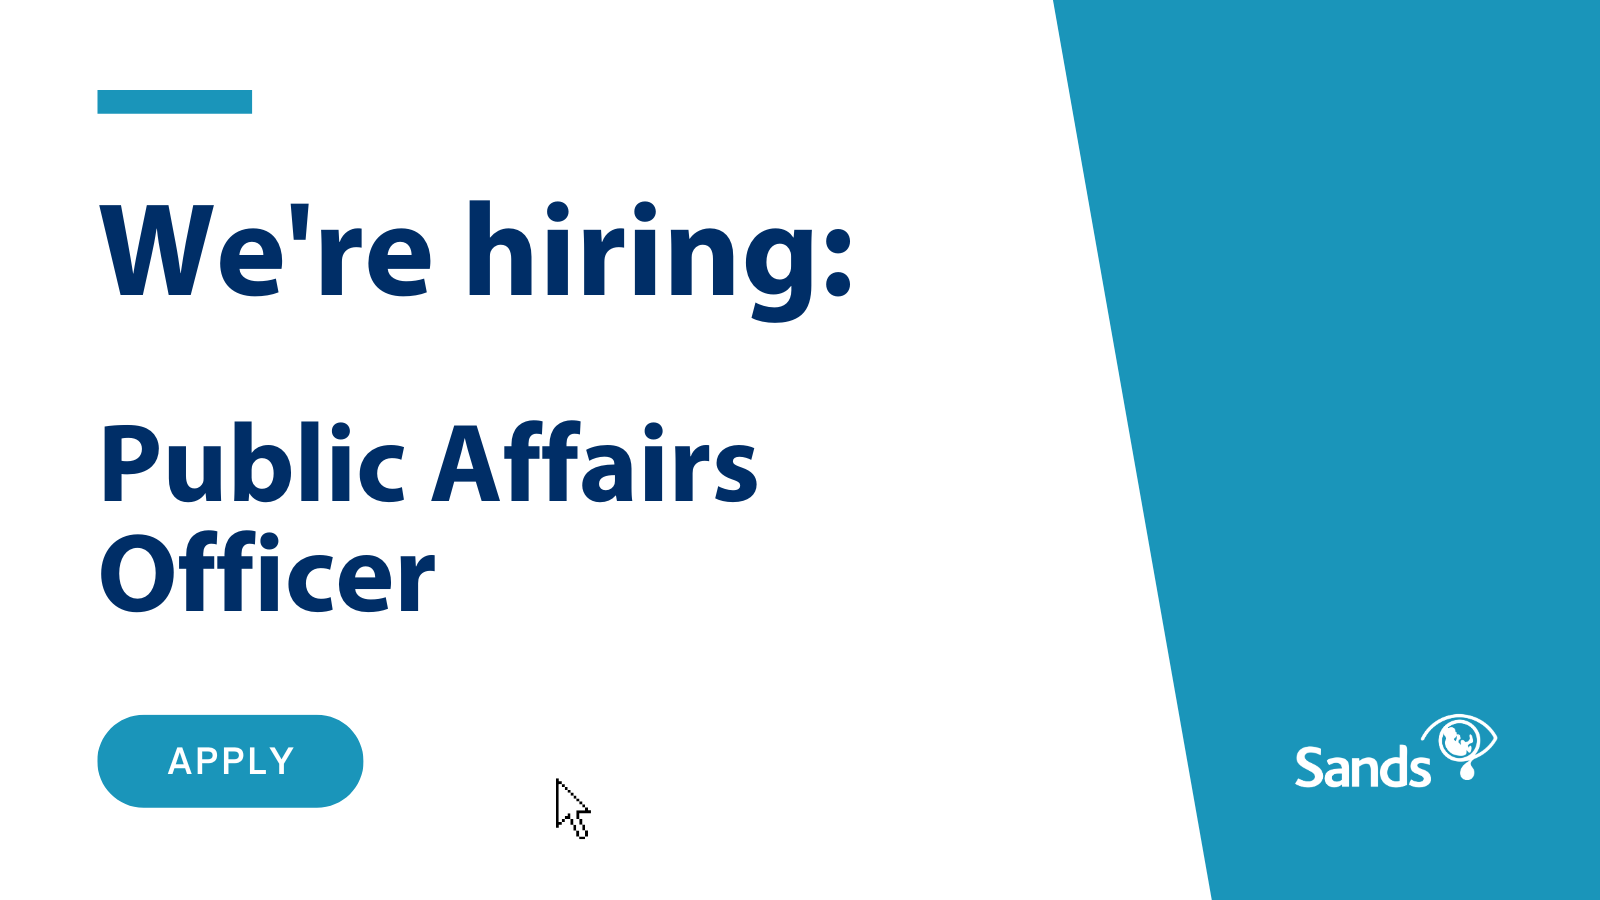 We are hiring Public Affairs Officer